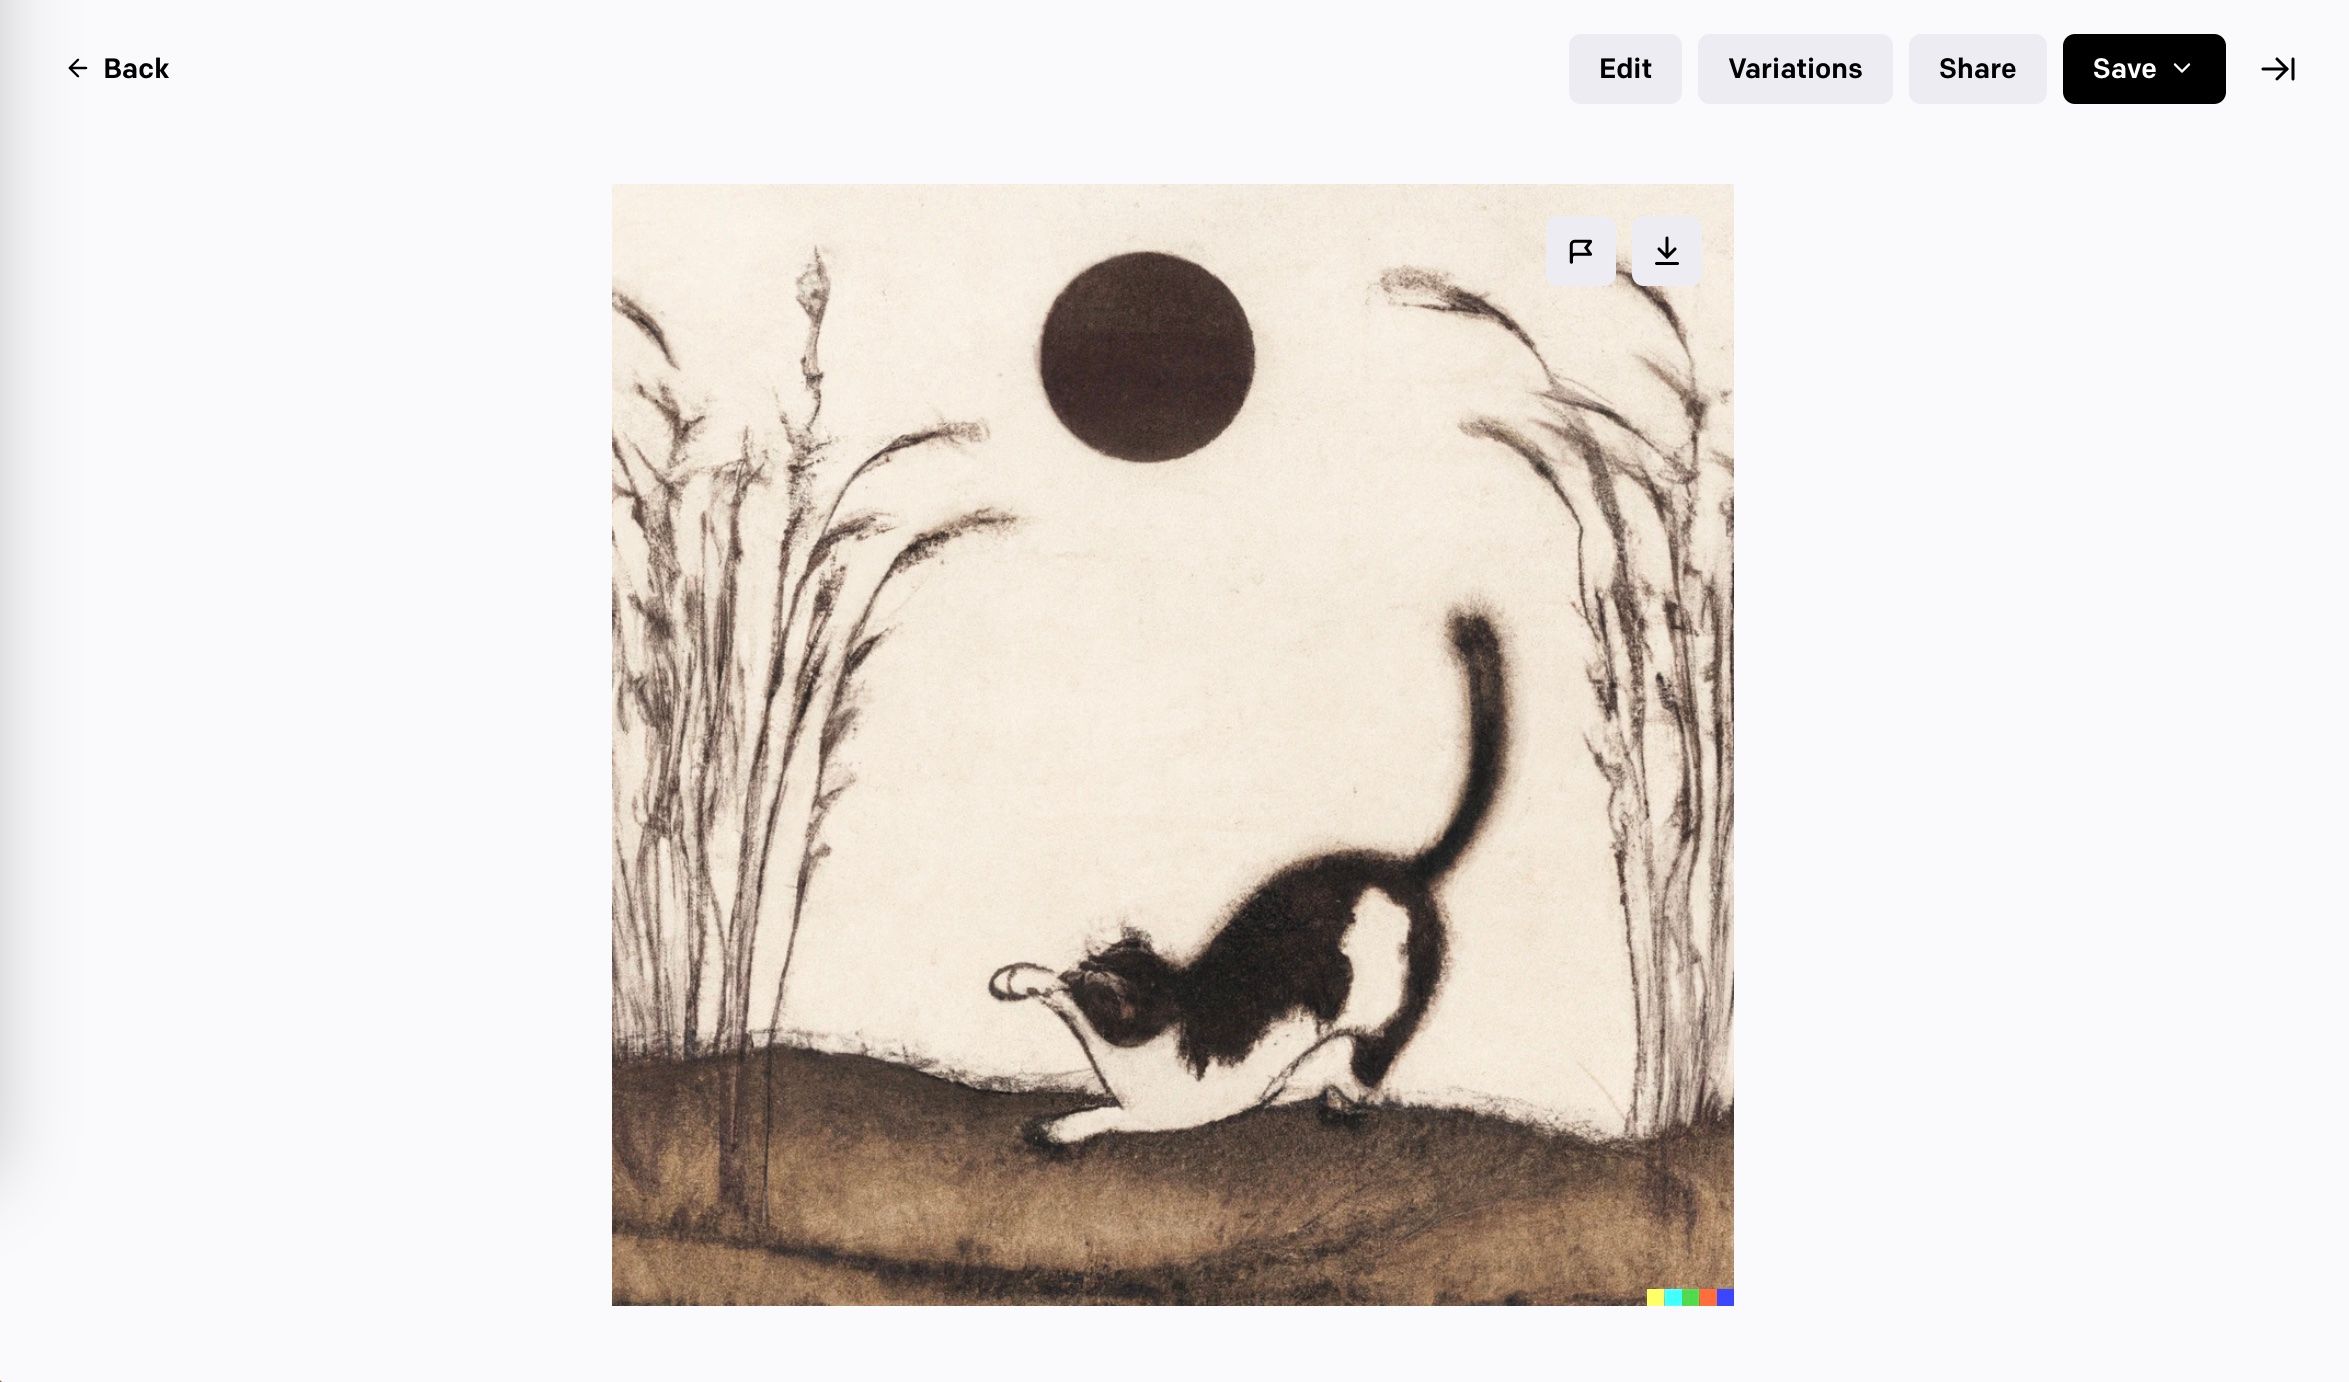 Screenshot of a cat playing in the field created using Dall-E